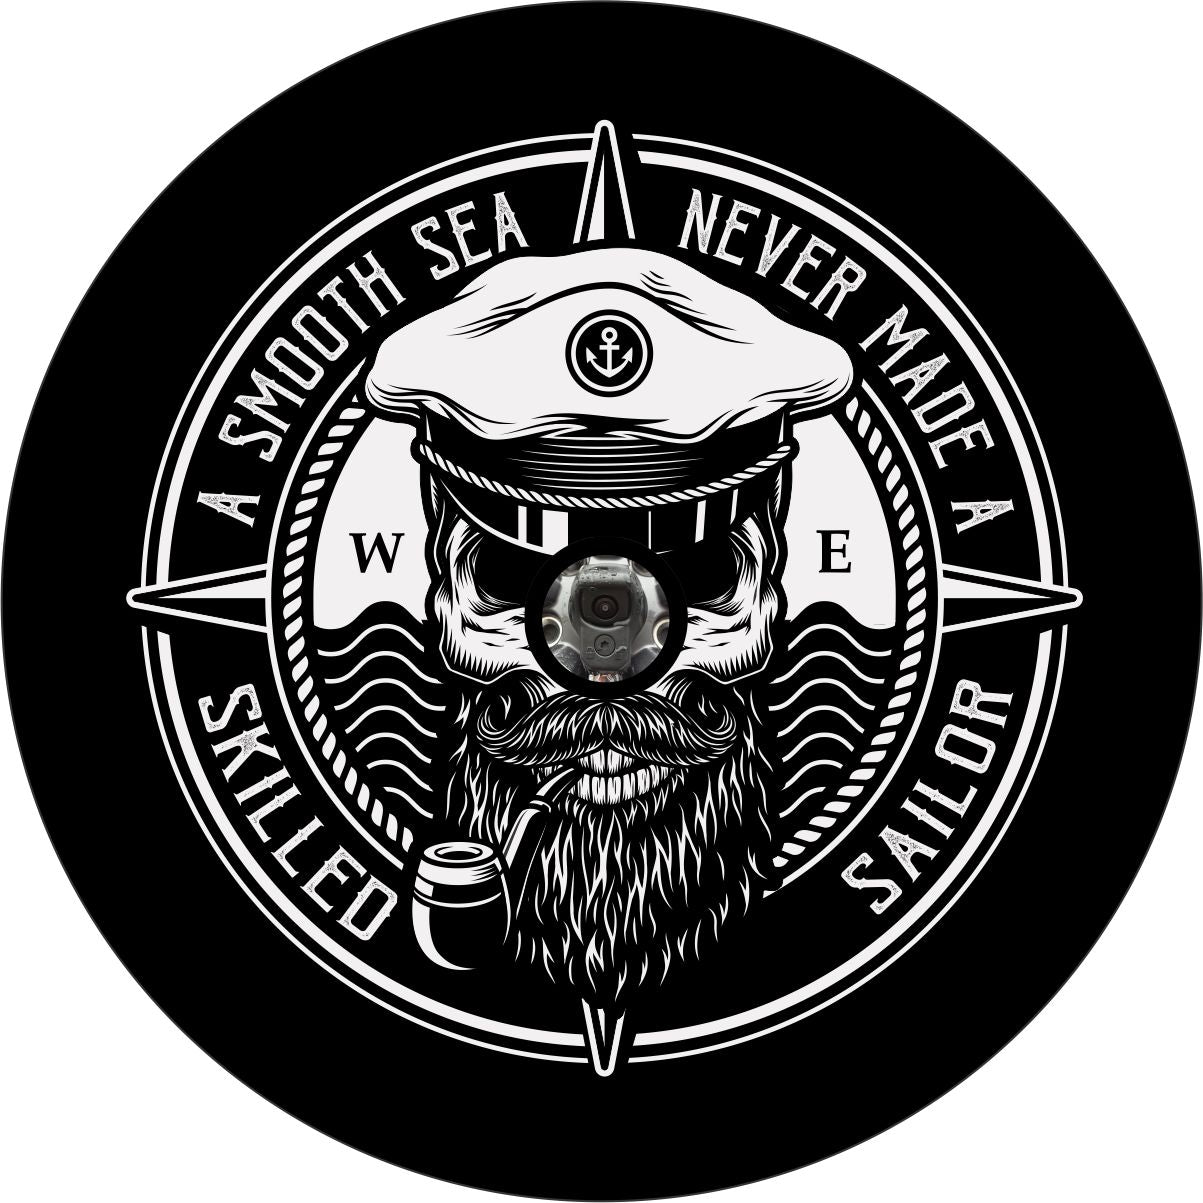 Unique spare tire cover design with a skull wearing a captains hat smoking a pipe and a compass style background with the saying a smooth sea never made a skilled sailor on the edge. Custom wheel cover is designed to accommodate spare tires with a back up camera. 